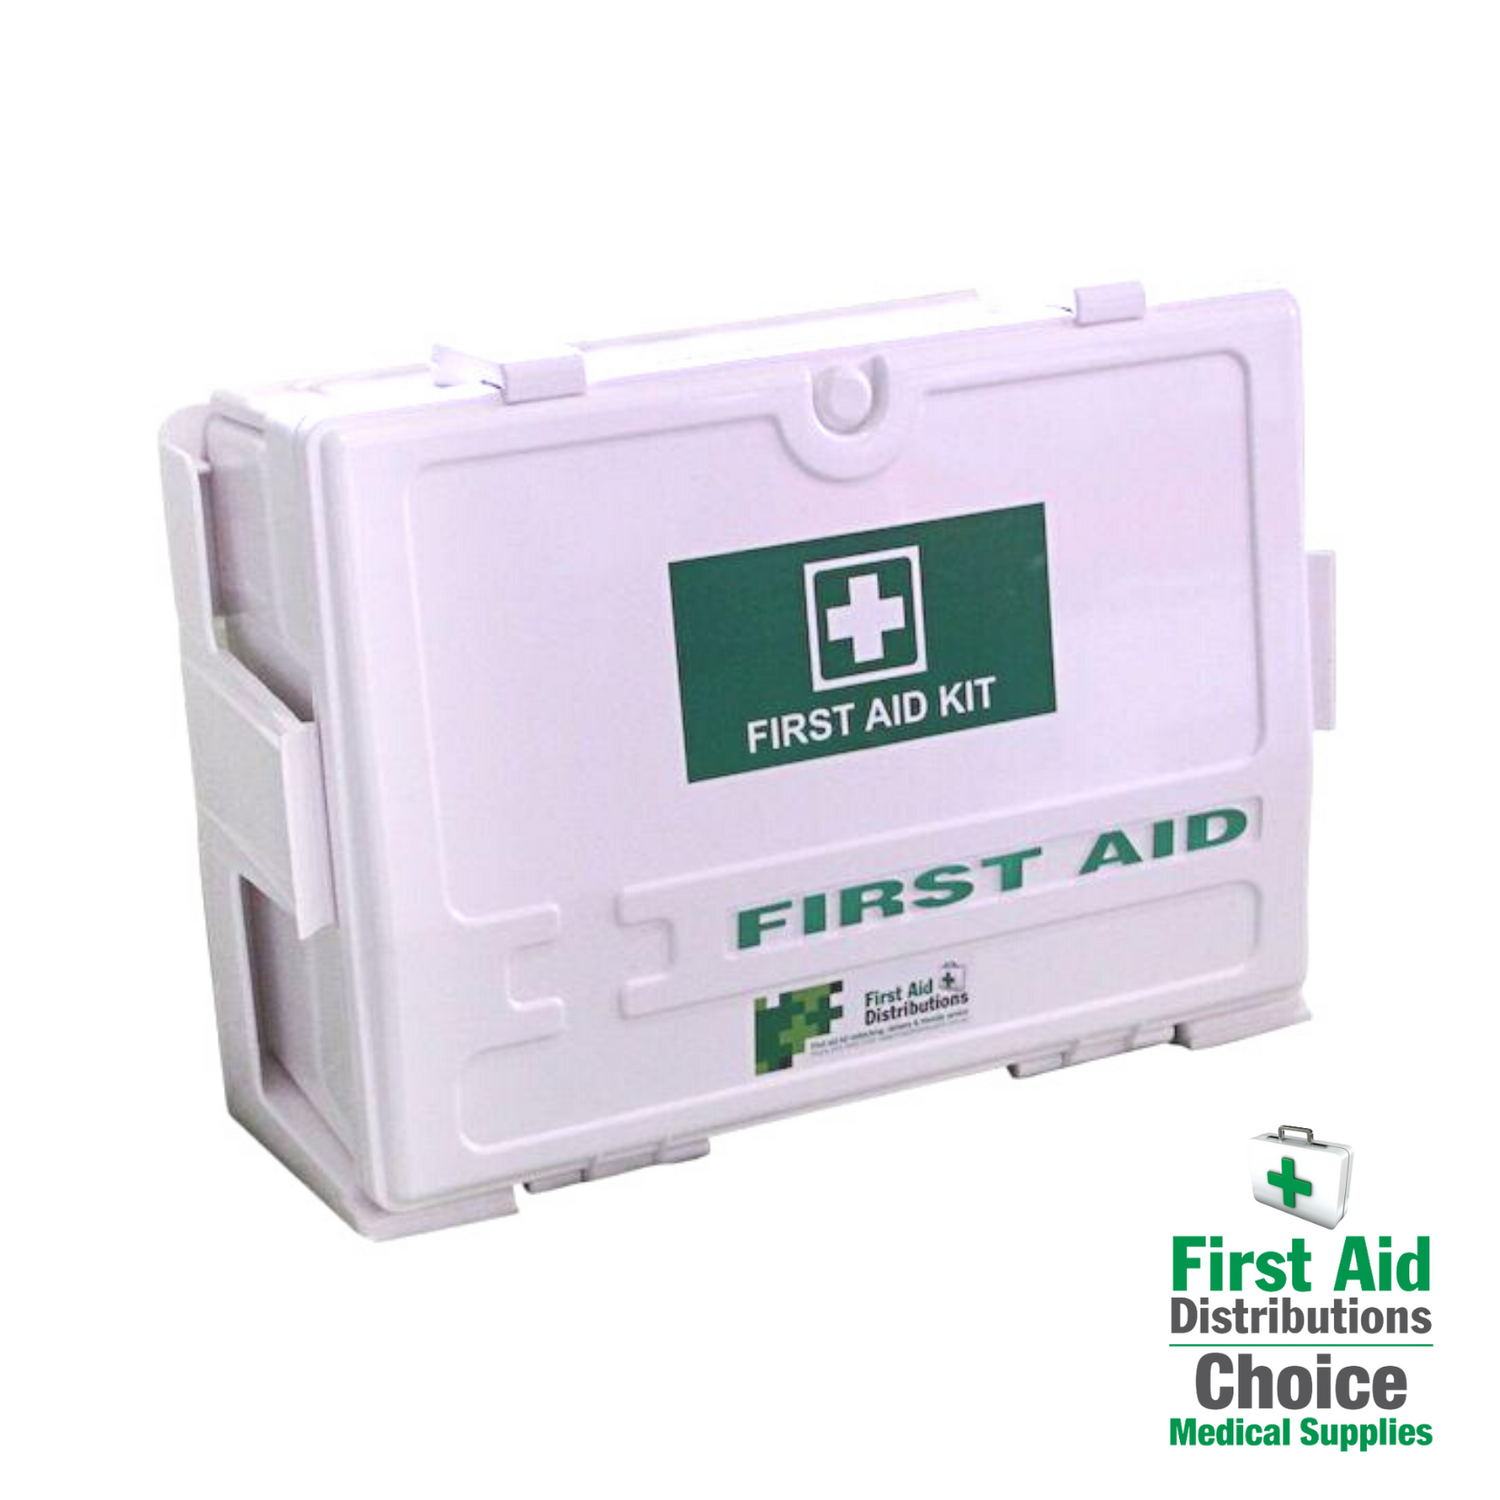 Empty first aid cases